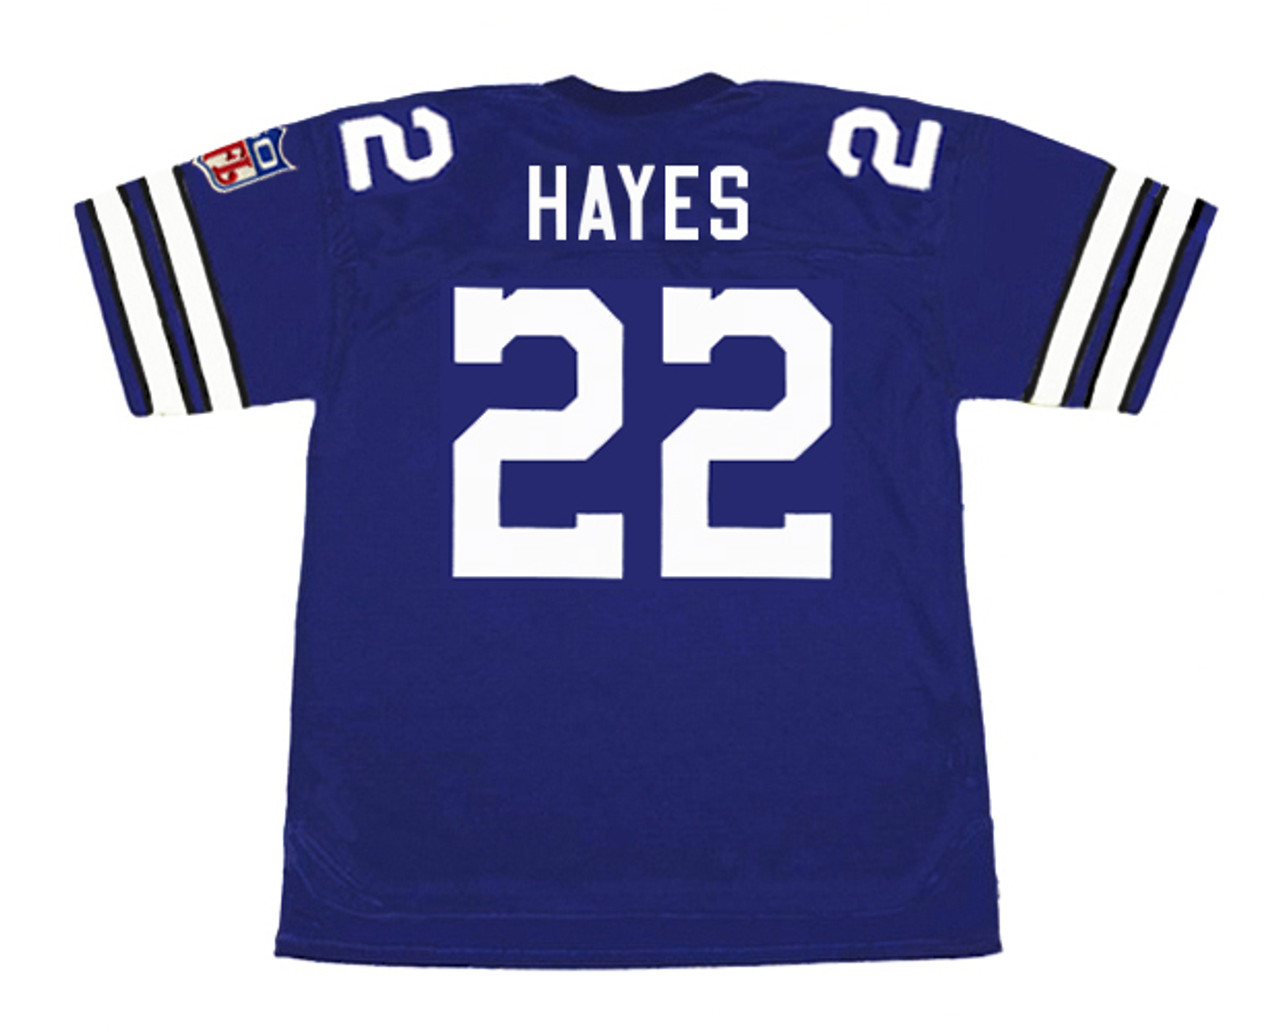 Willie Mays Hayes Cleveland Indians Throwback Jersey for Sale in